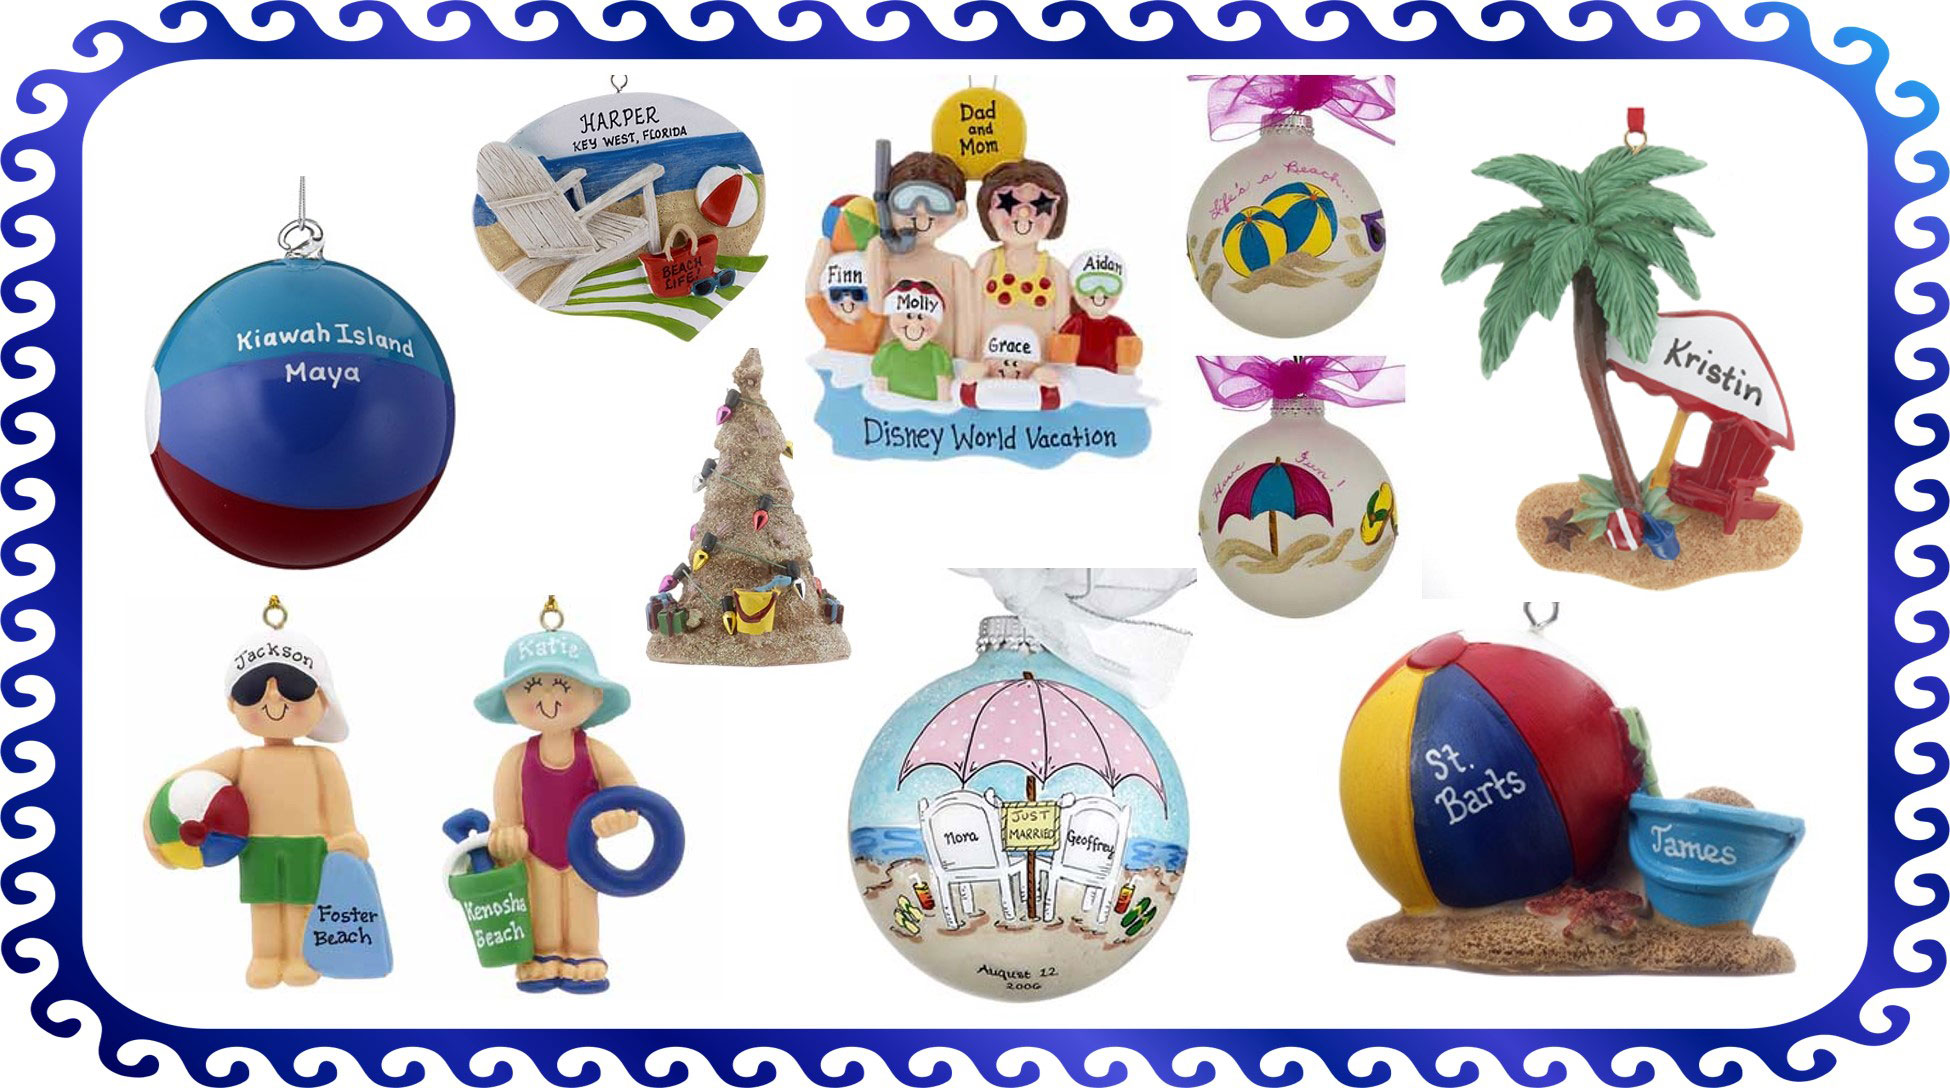 Collage of personalized beach ornaments at OrnamentShop.com | OrnamentShop.com